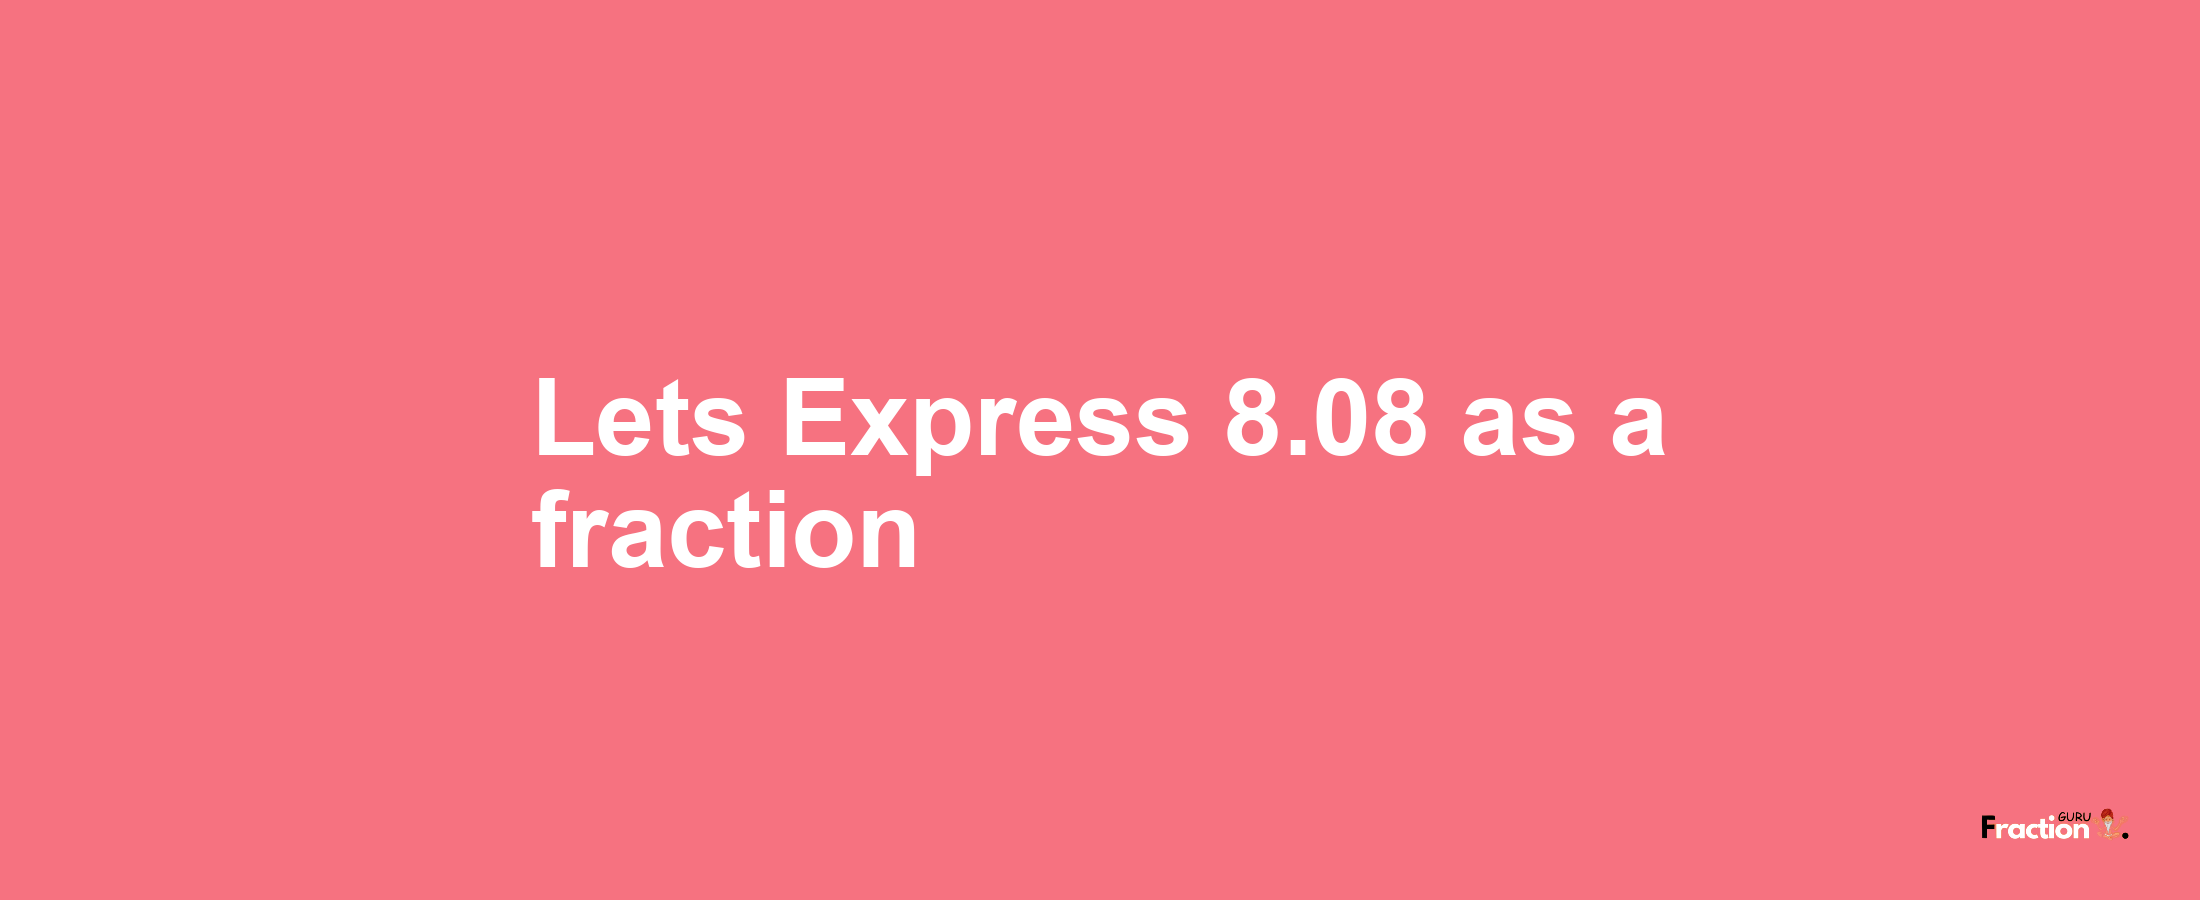 Lets Express 8.08 as afraction